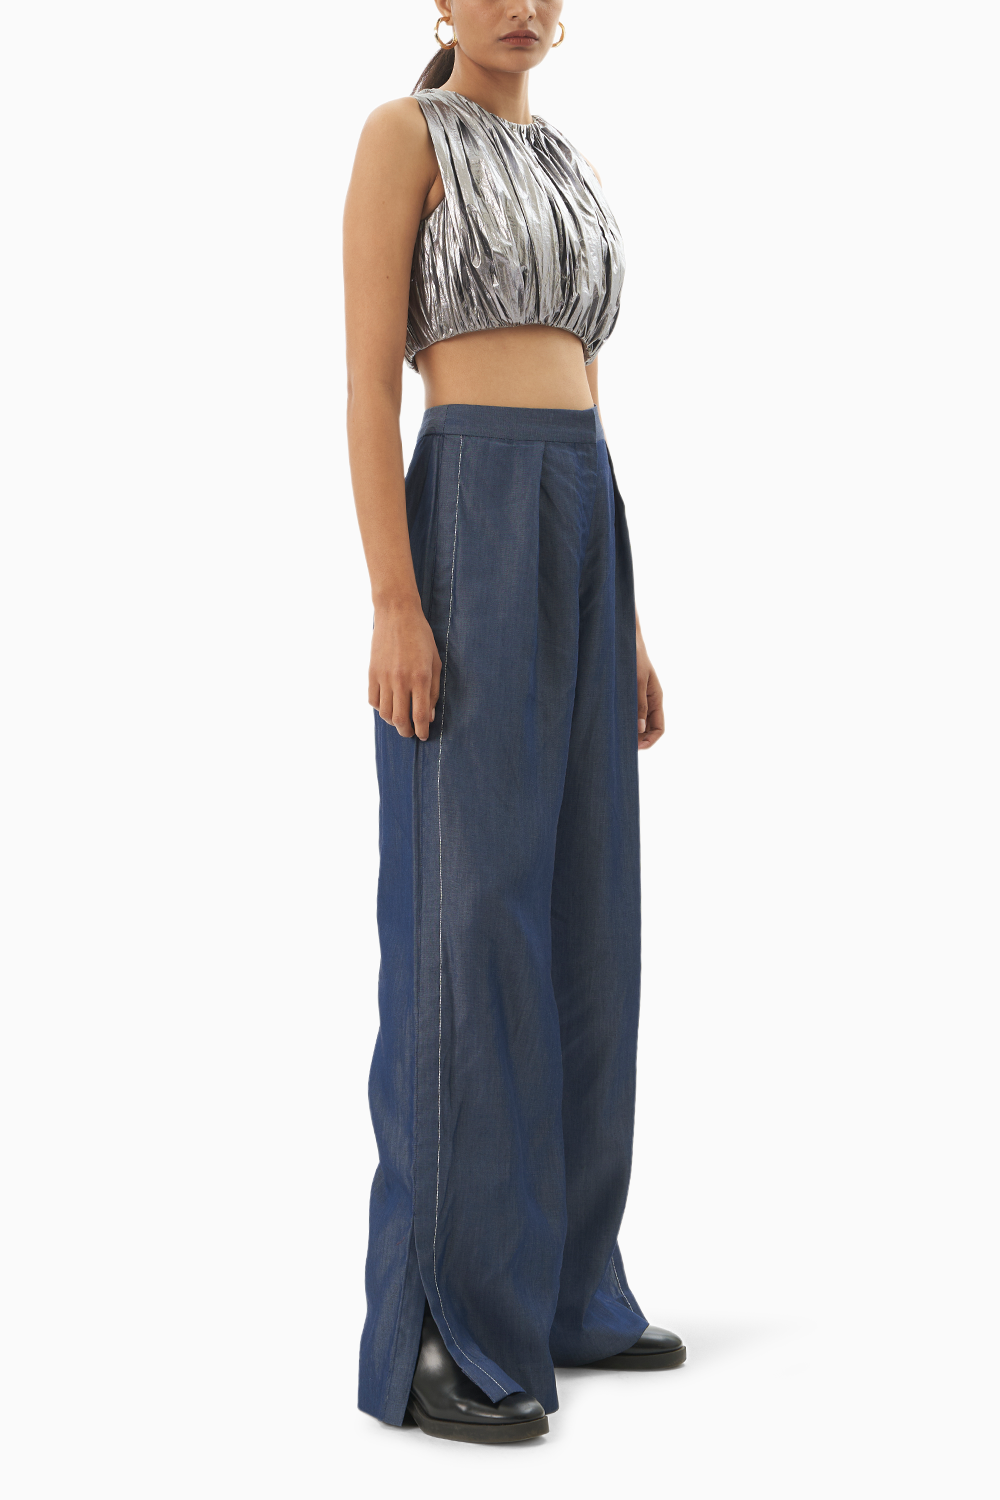 Ruched Foil Top and Denim Trouser